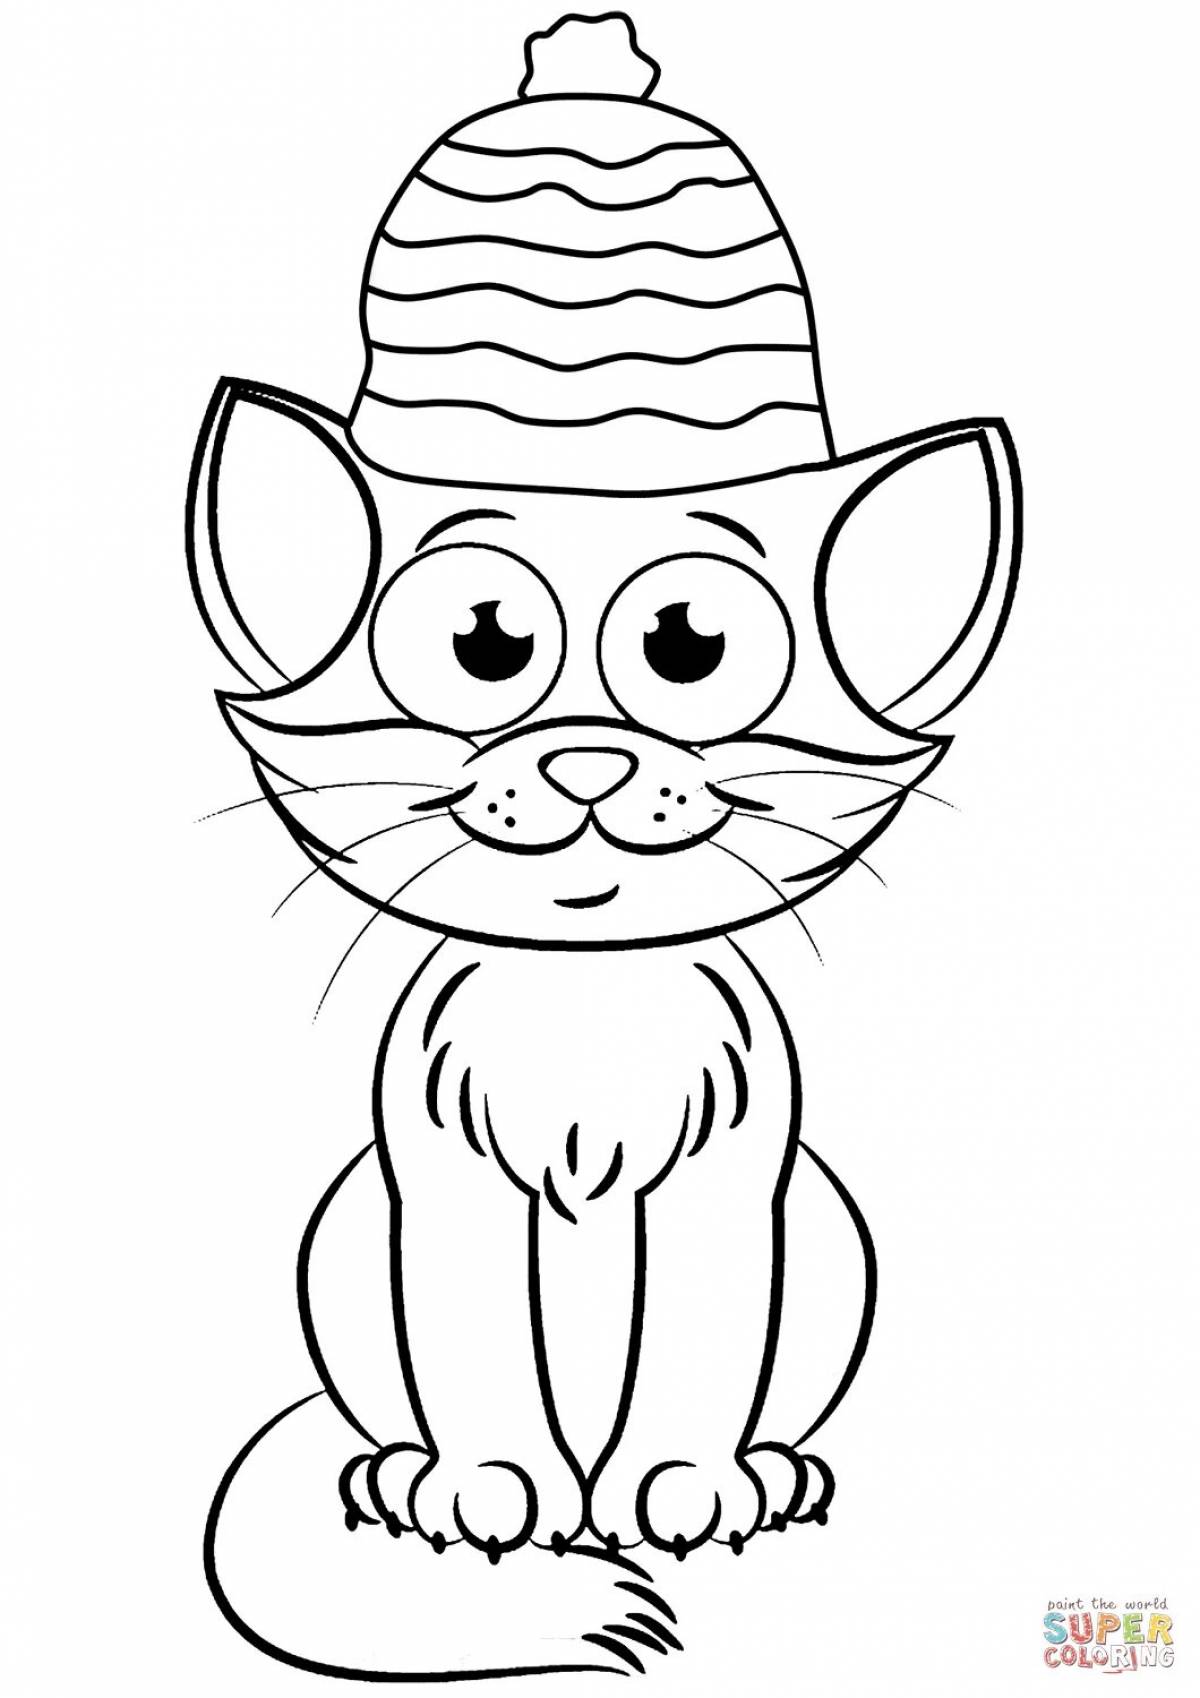 Coloring page bizarre cat in a hat